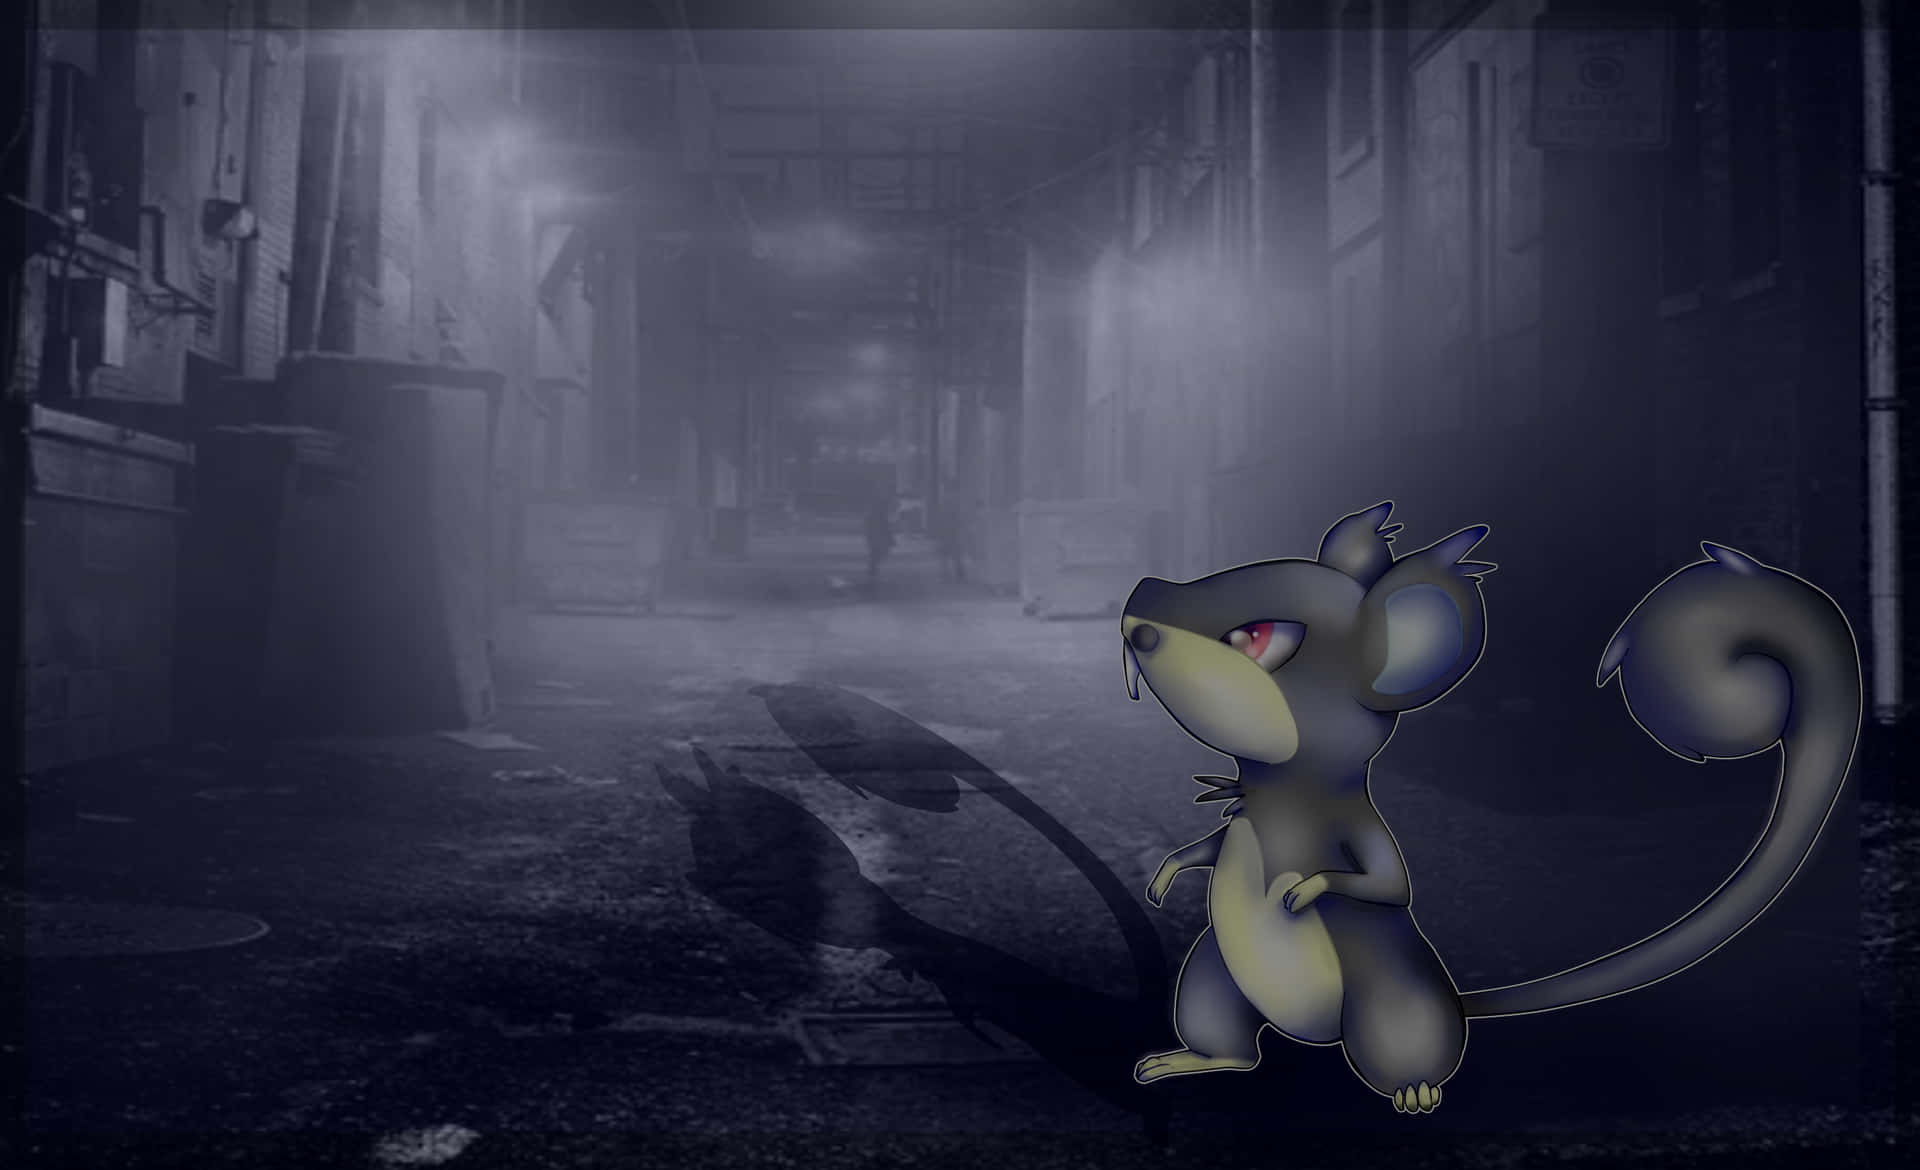 Art Of Gray Alolan Rattata In The Middle Of A Dark Alleyway Wallpaper